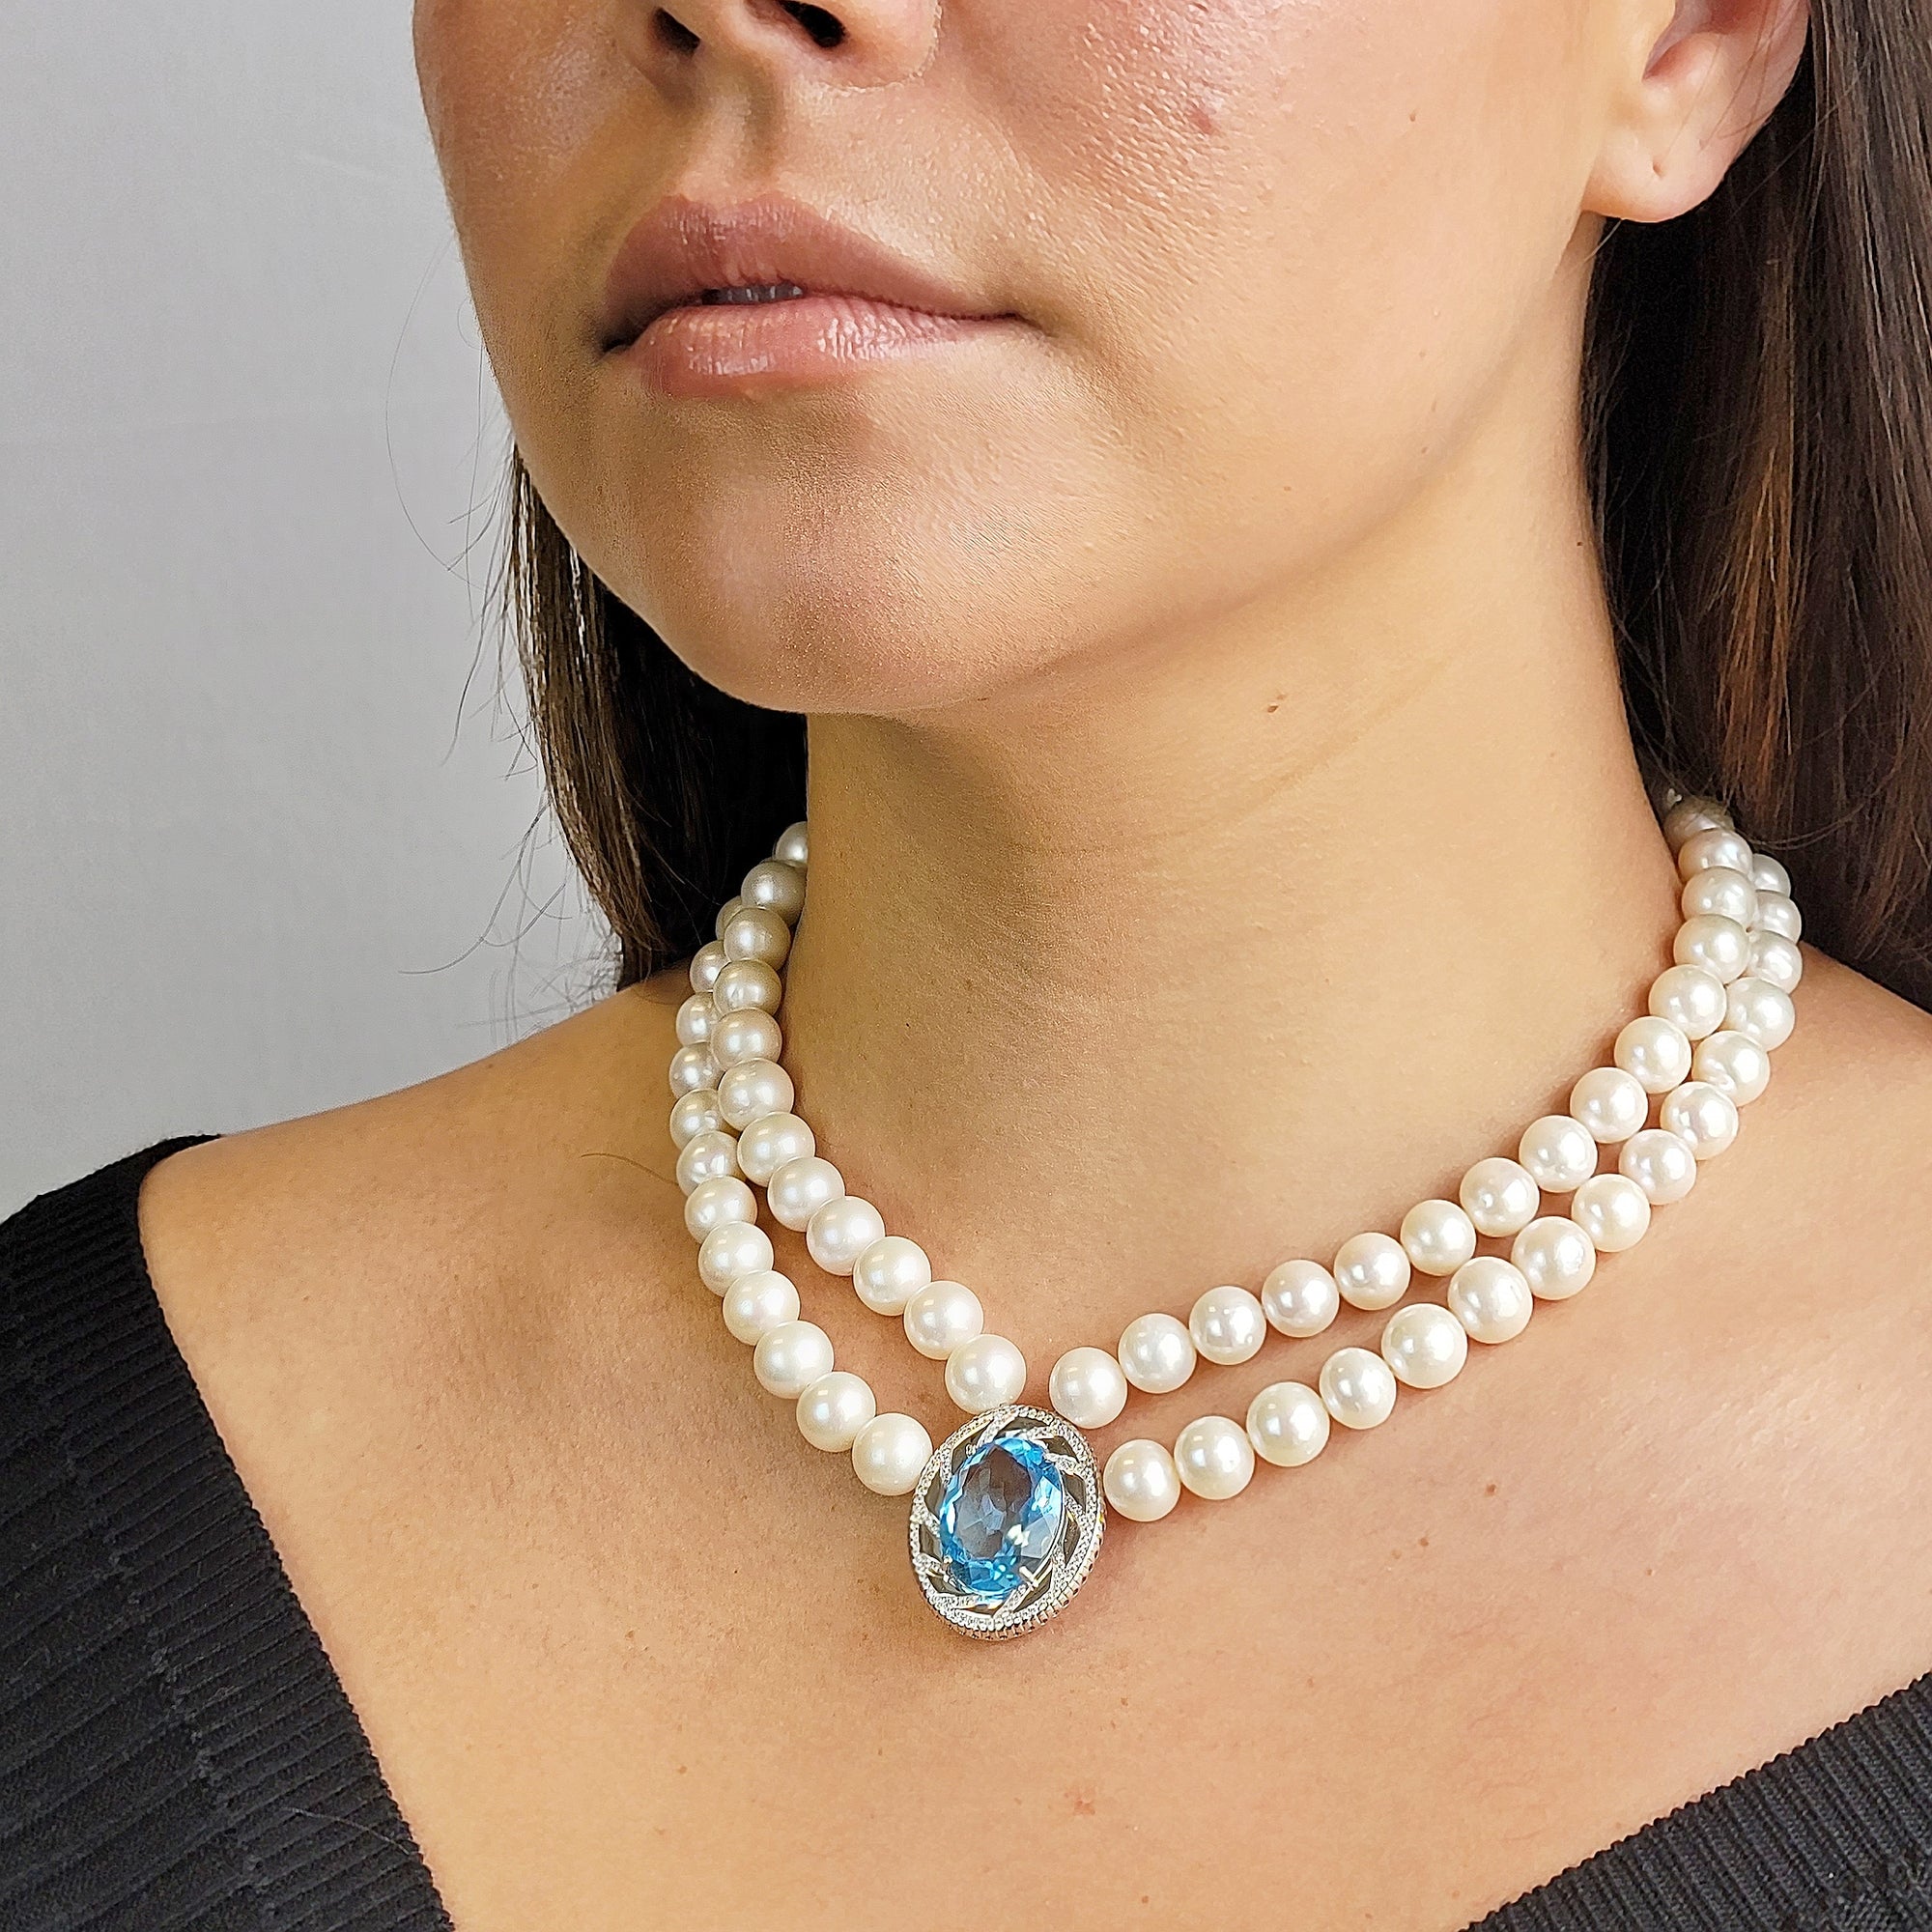 Swiss Blue Topaz and Pearl Necklace